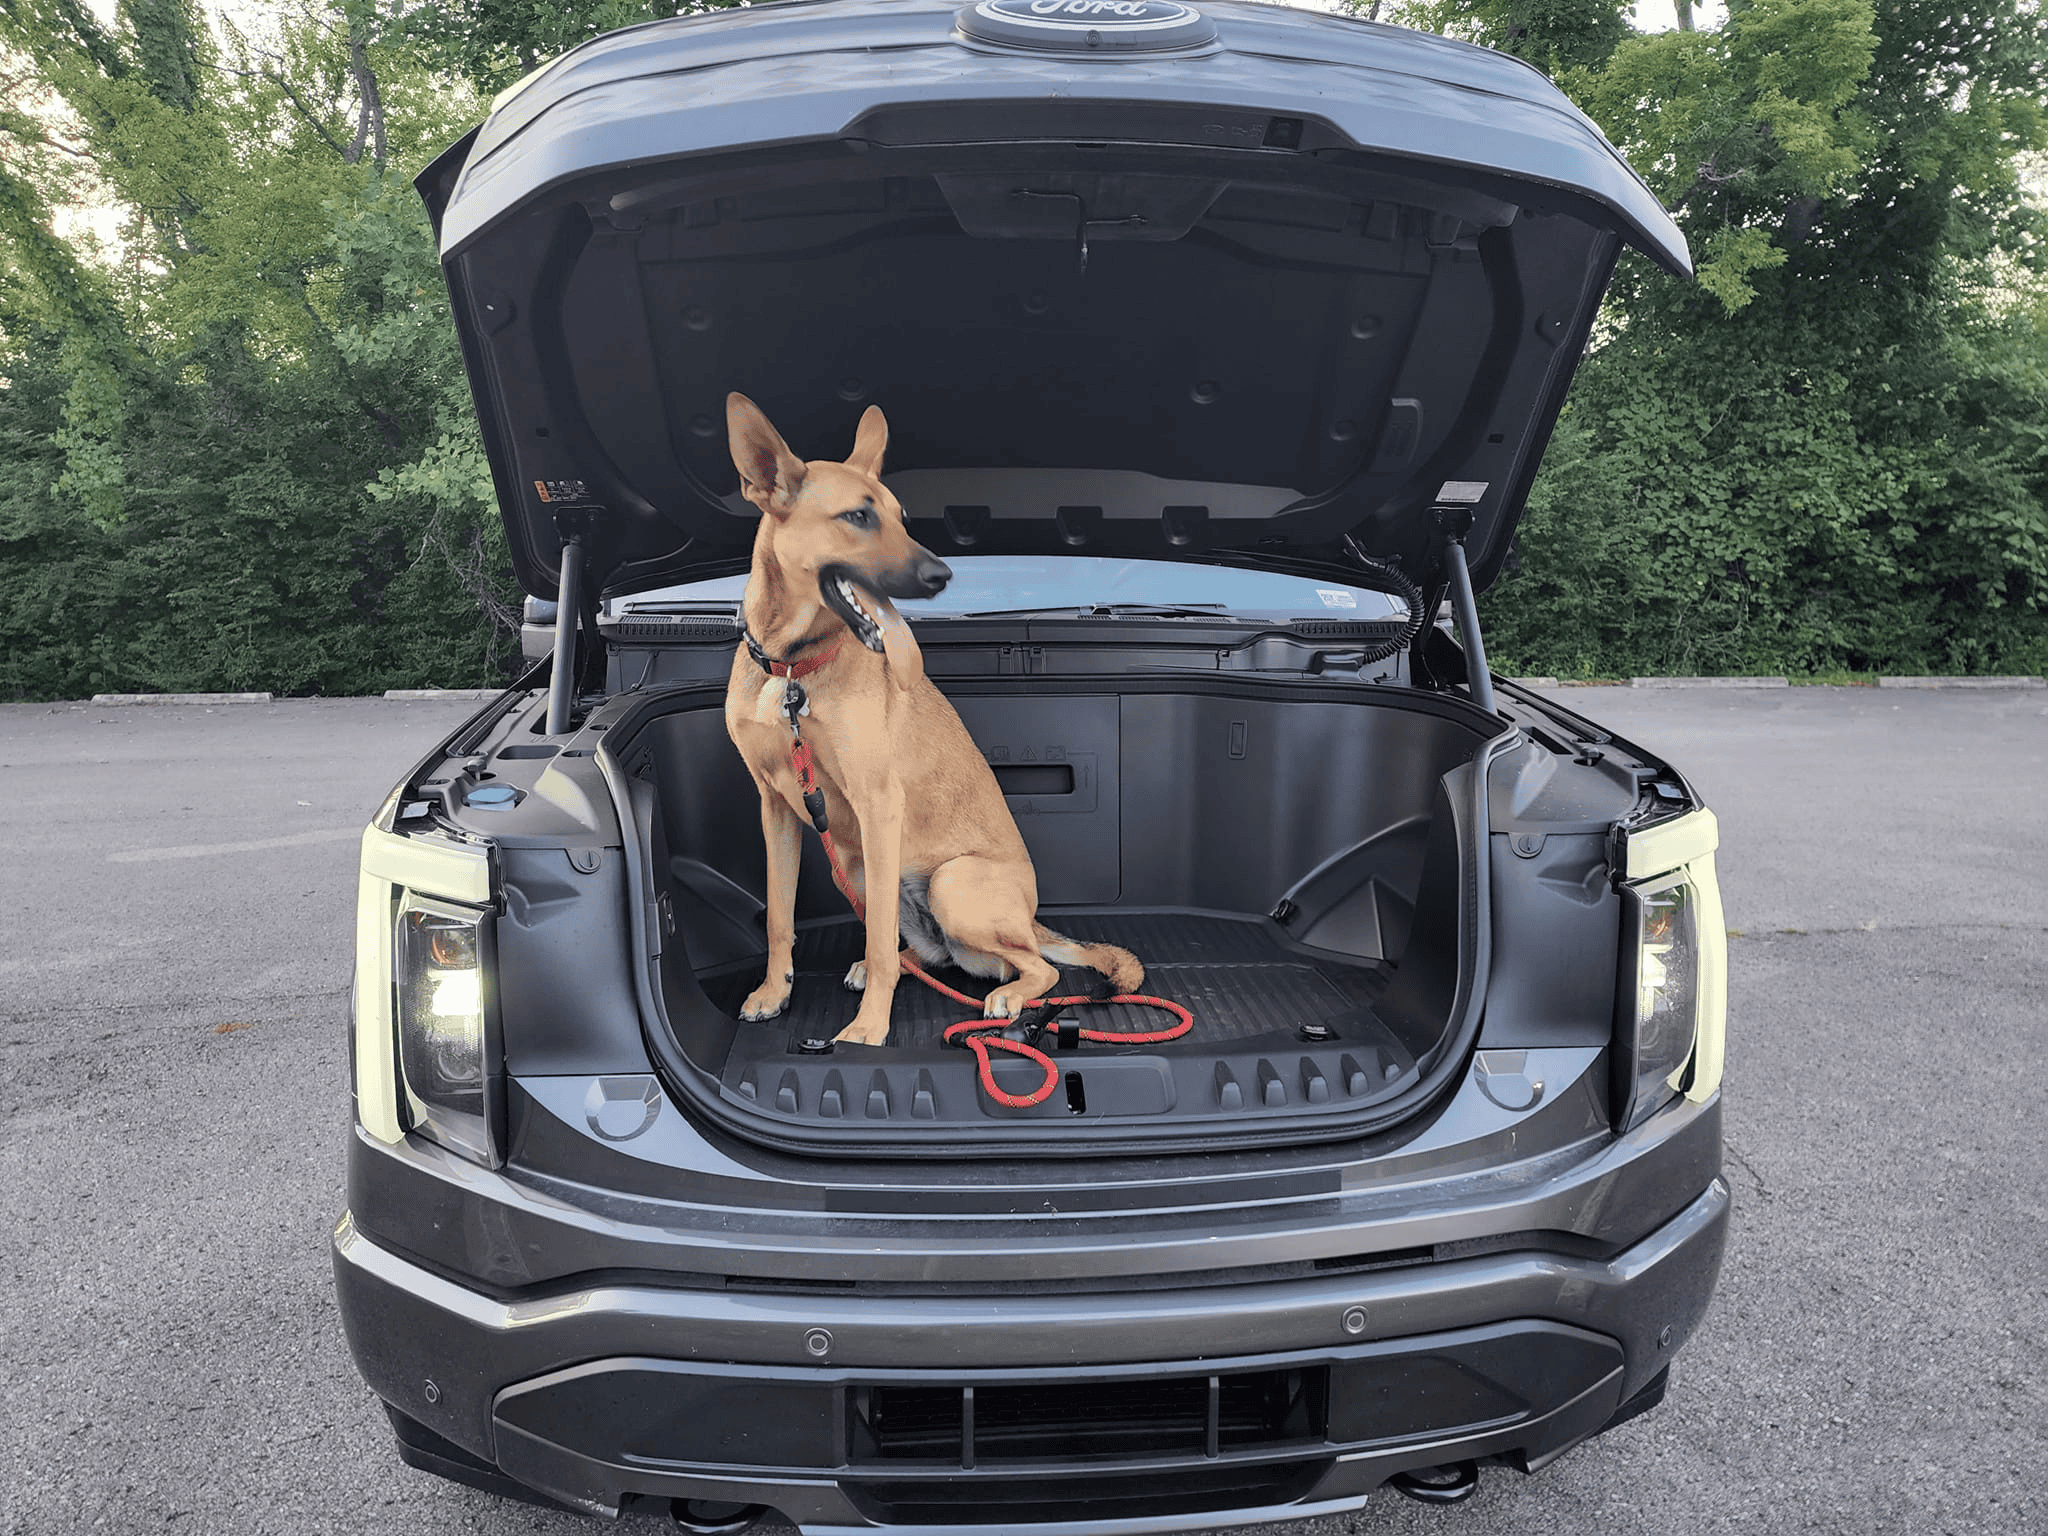 Ford F-150 Lightning Post a pic of your Dog in your new Lightning 😁 1656984883178